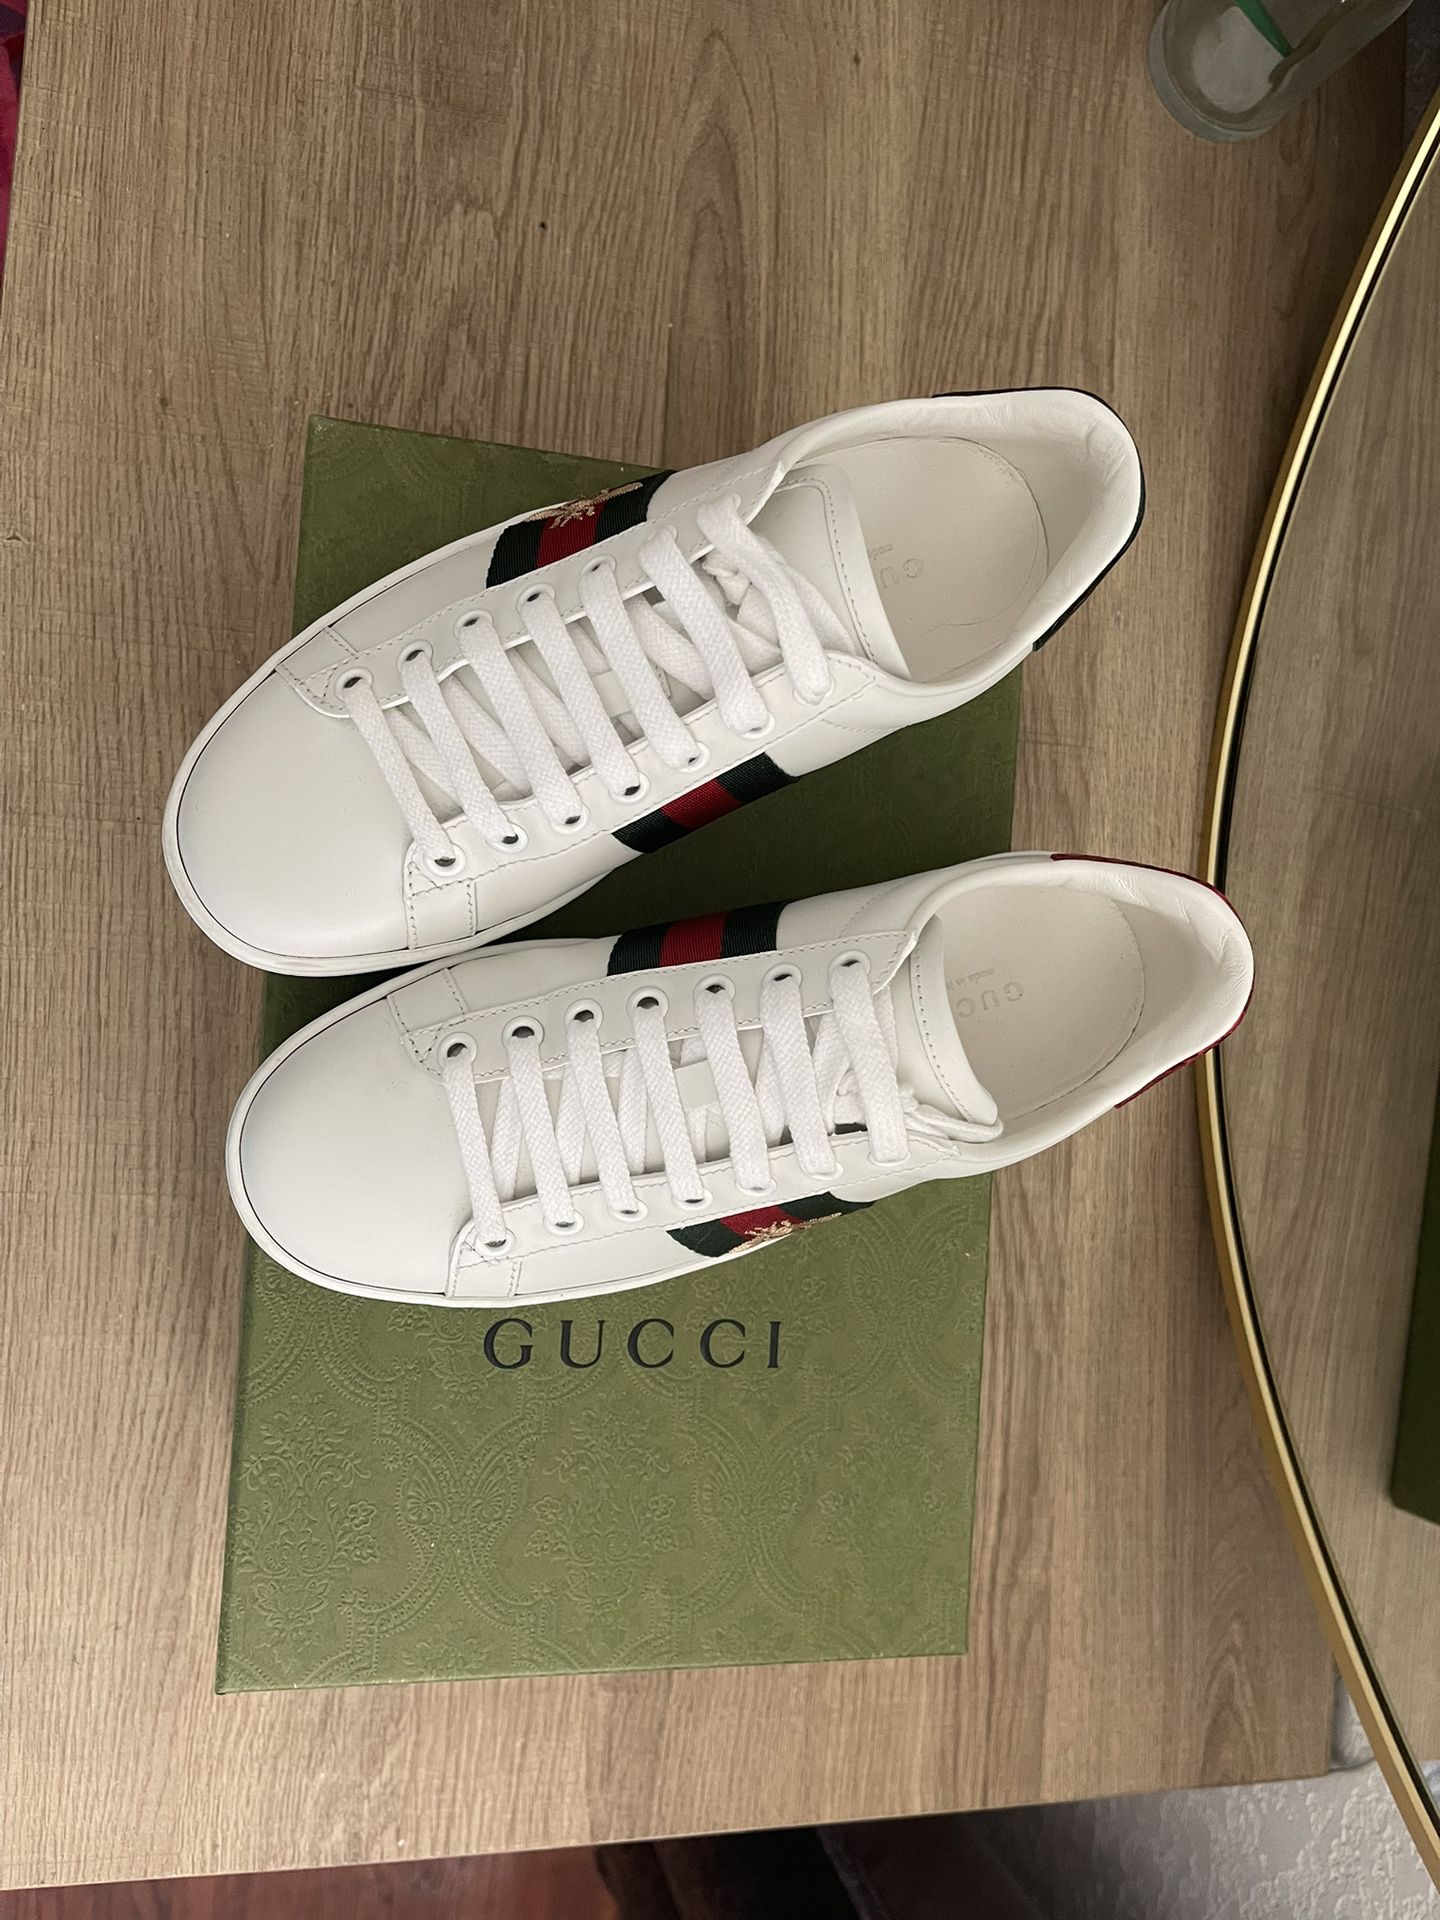 Gucci new ace sneakers size 4 1/2 equivalent to a 5 1/2